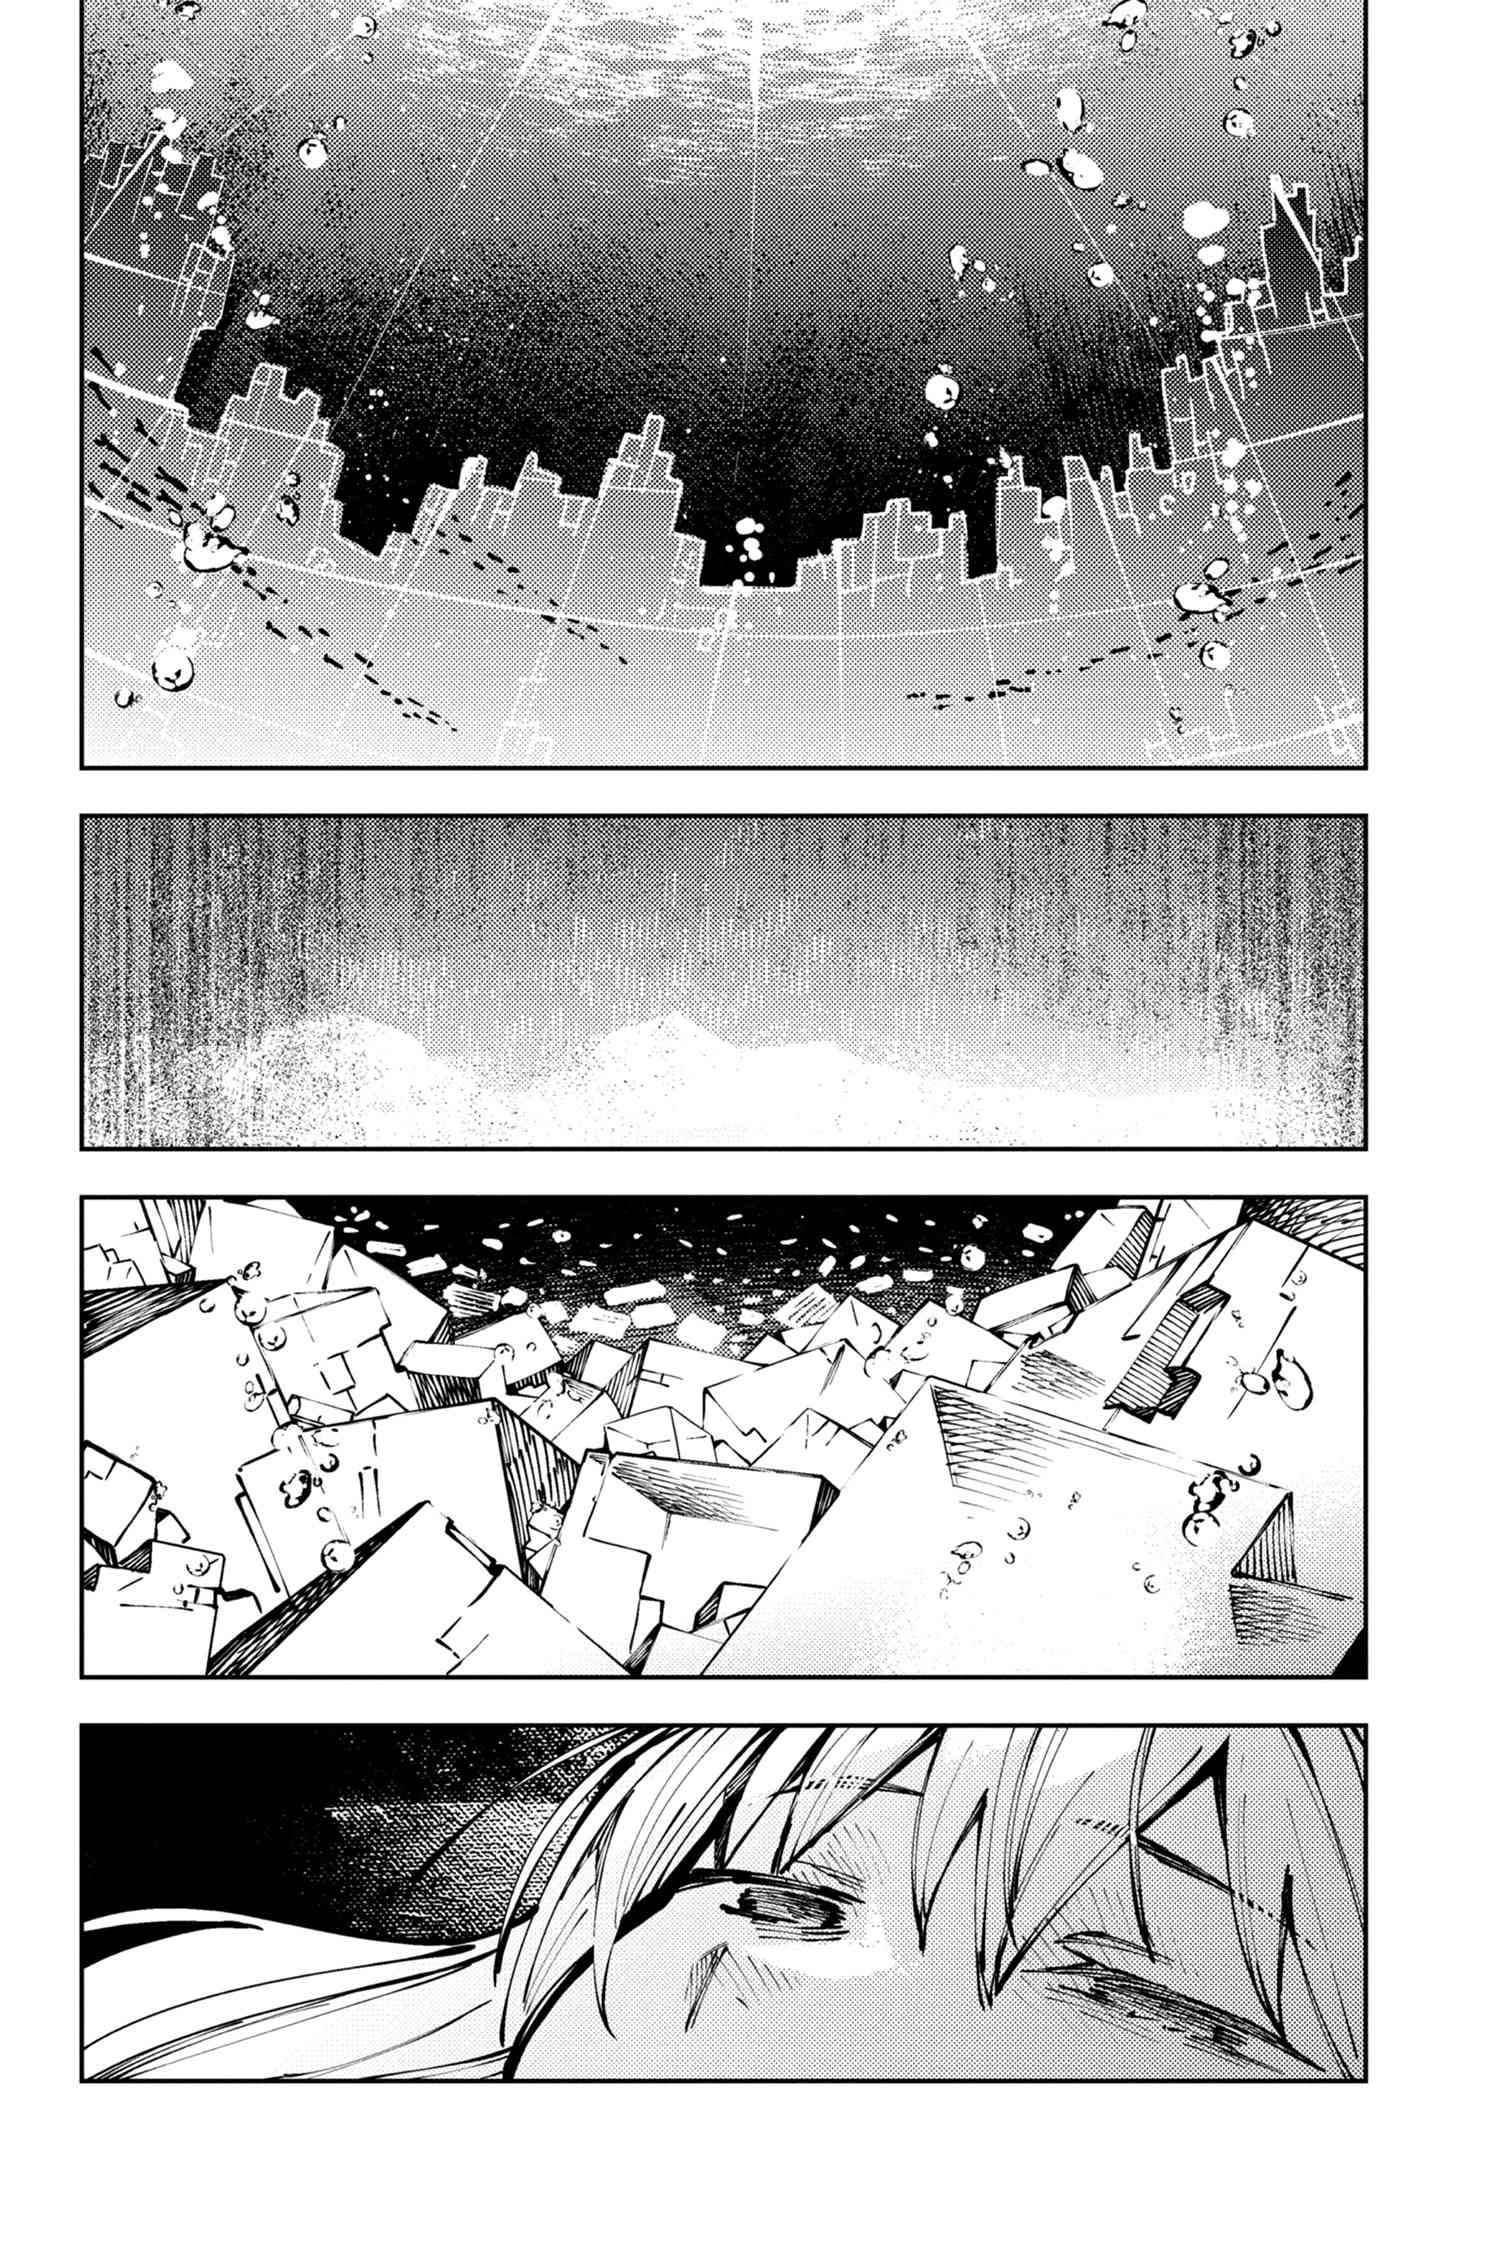 Fate/grand Order -Epic Of Remnant- Deep Sea Cyber-Paradise Se.ra.ph - 28.2 page 6-fbbfab61